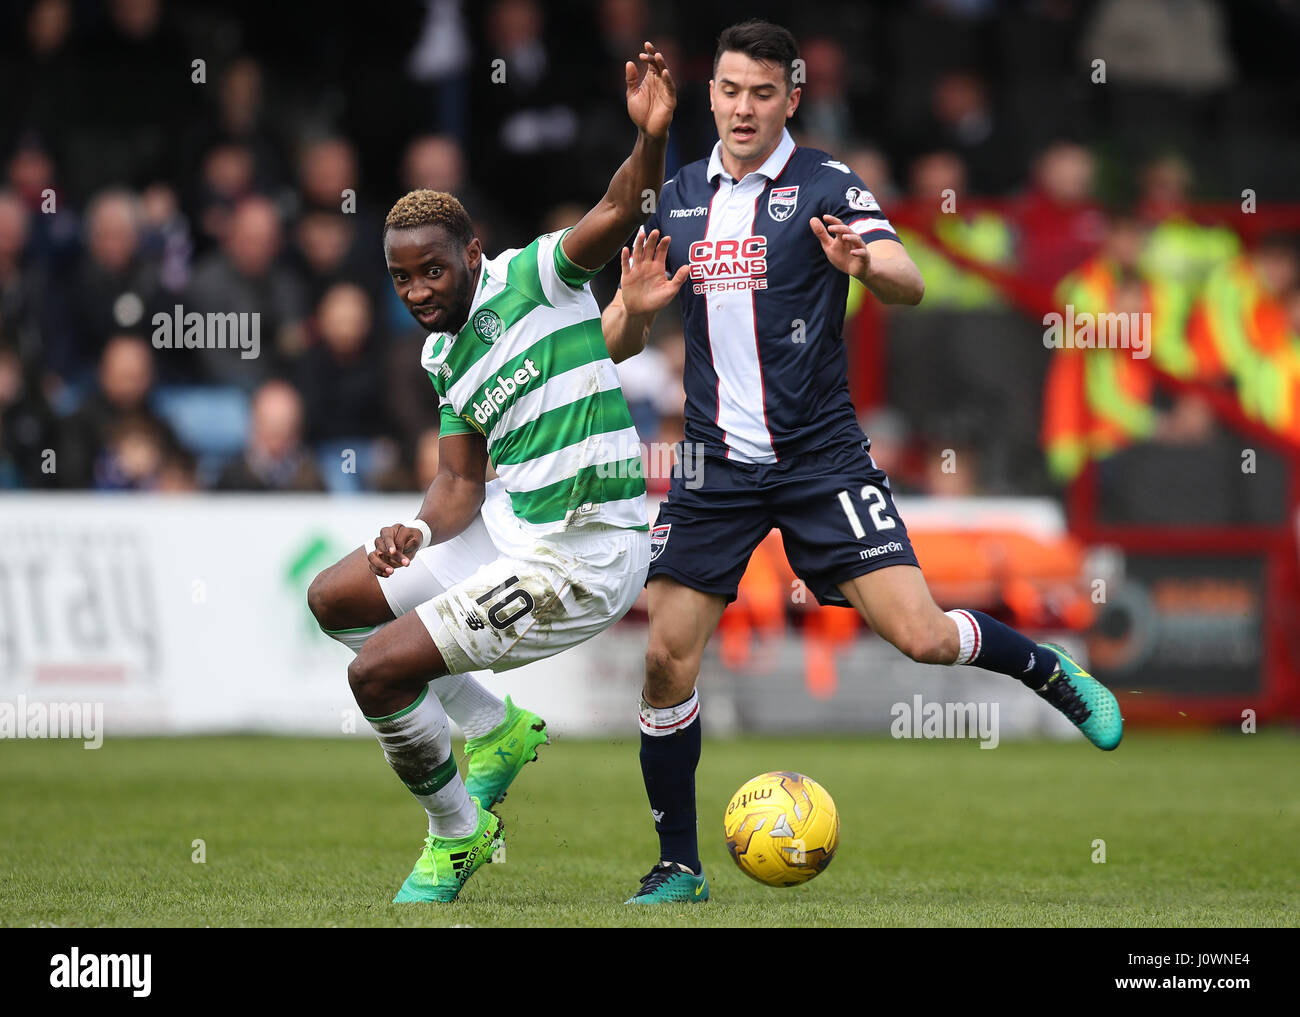 Celtic's Moussa Dembele ans Ross County's Tim Chow battle for the ball during the Ladbrokes Scottish Premiership match at the Global Energy Stadium, Dingwall. Stock Photo